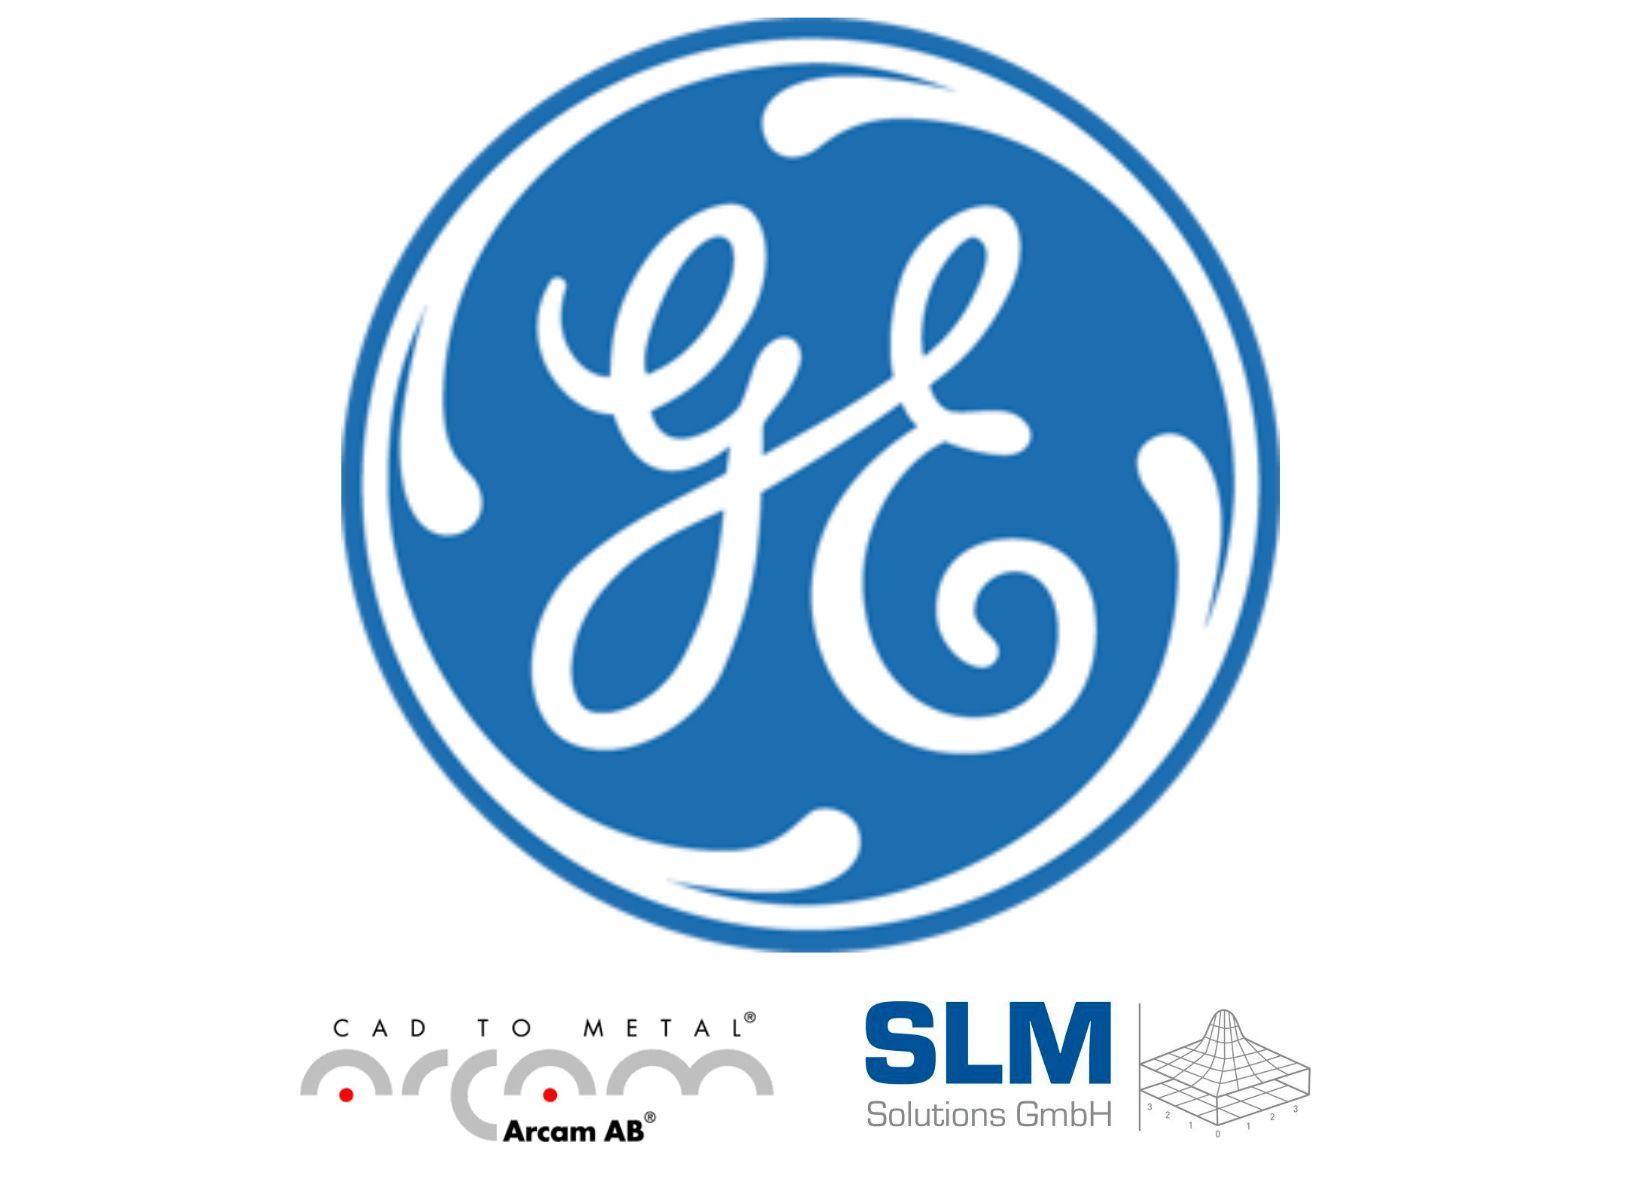 General Electric Company Logo - BREAKING: General Electric to Acquire Both Arcam AND SLM! | General ...